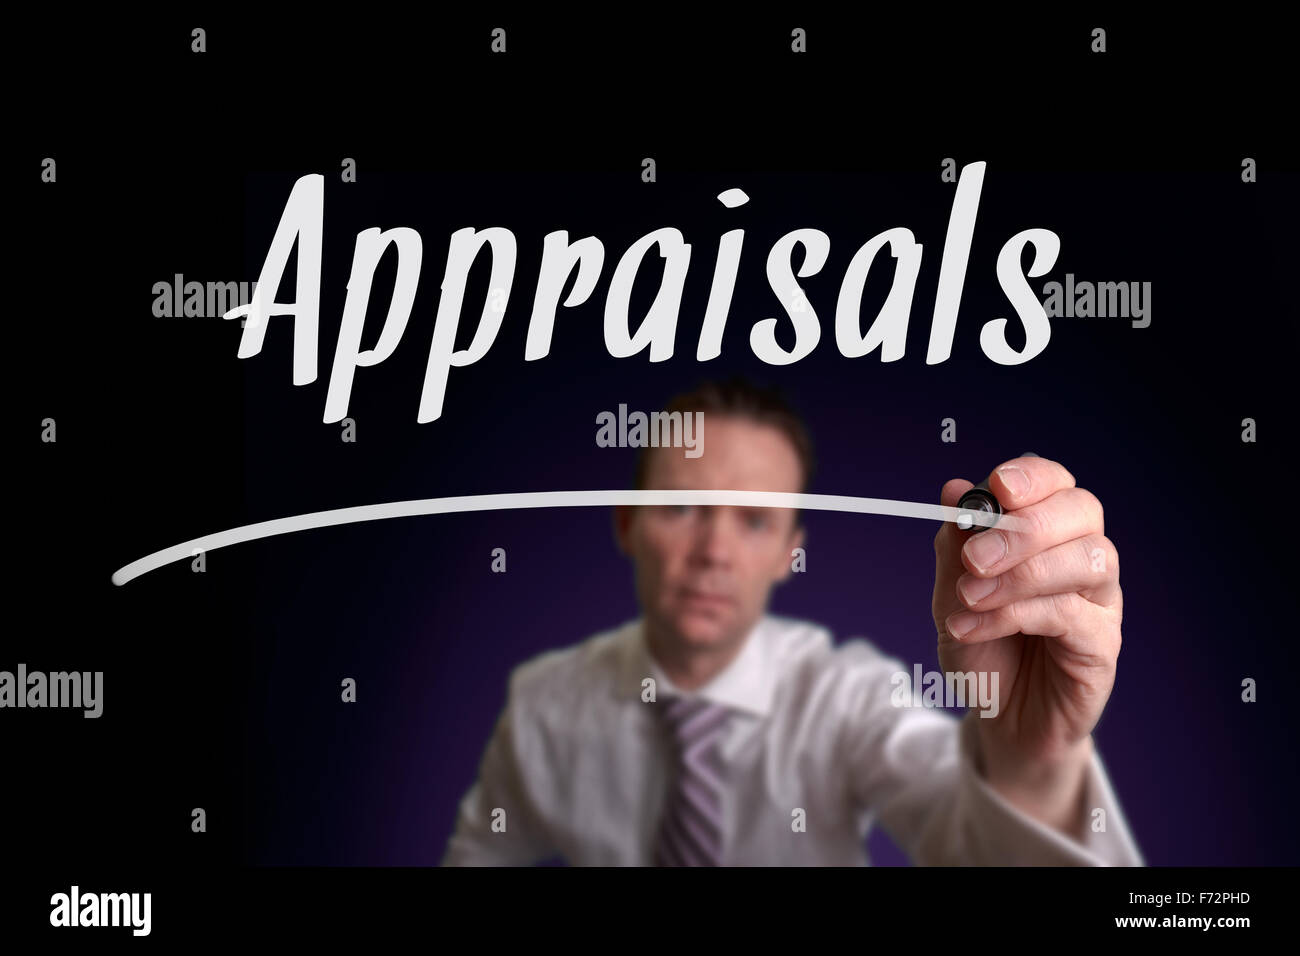 Appraisals, Induction Training headlines concept. Stock Photo